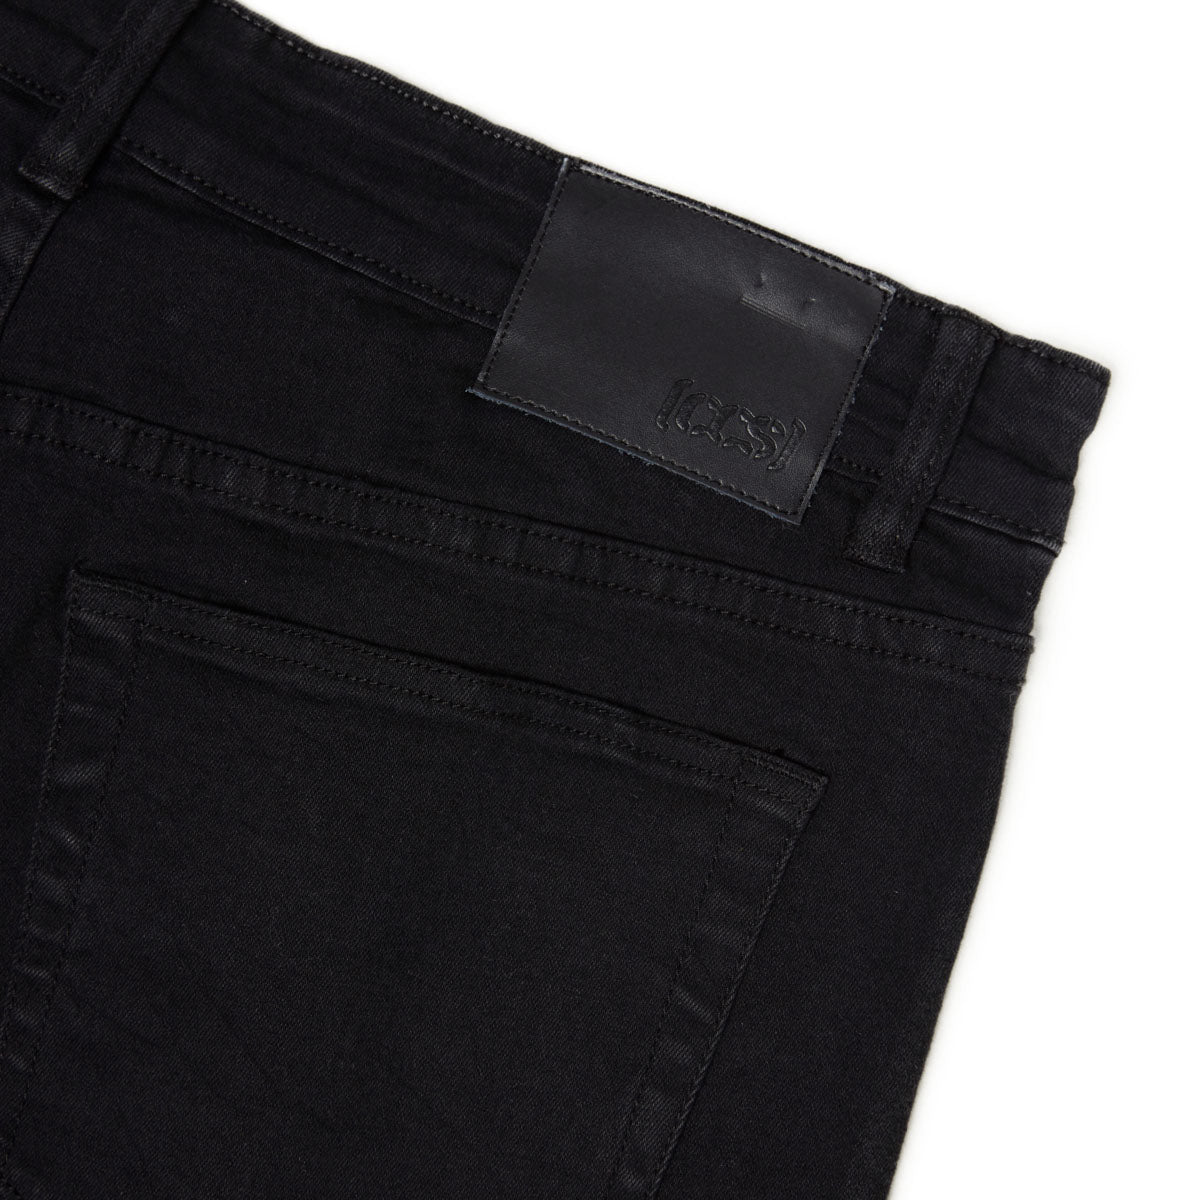 CCS Standard Plus Relaxed Denim Jeans - Overdyed Black image 6